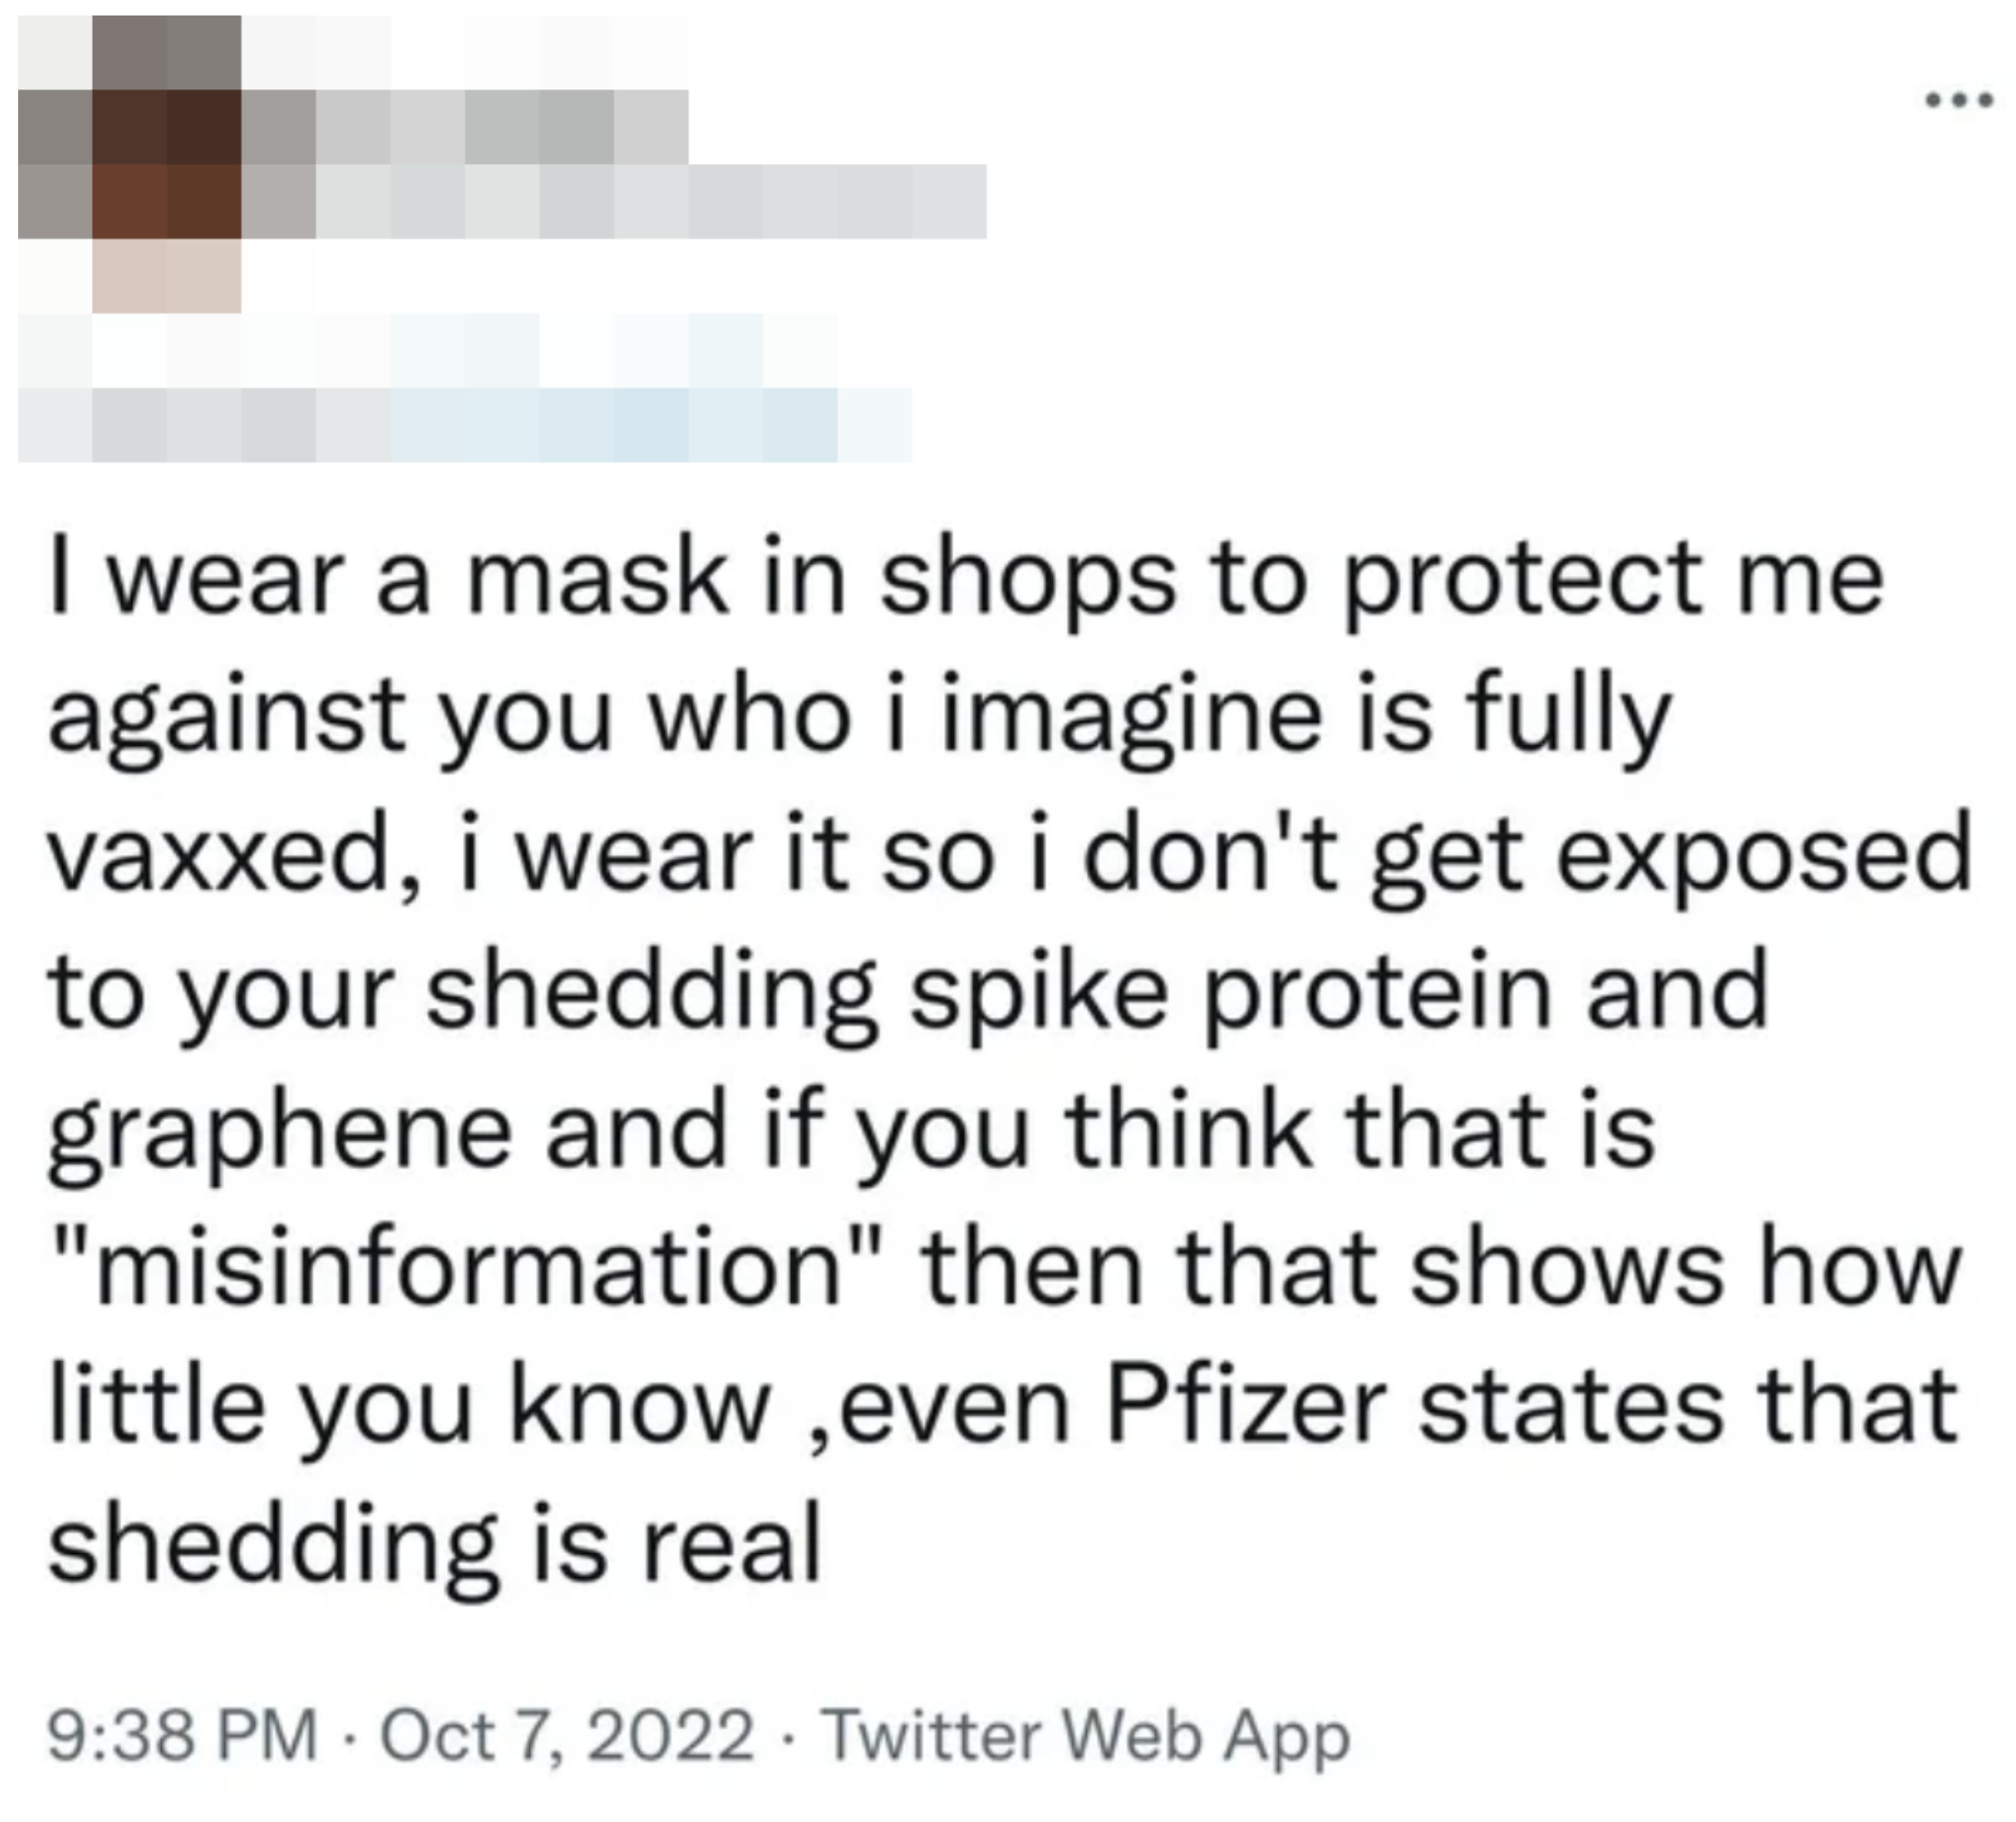 &quot;even Pfizer states that shedding is real&quot;